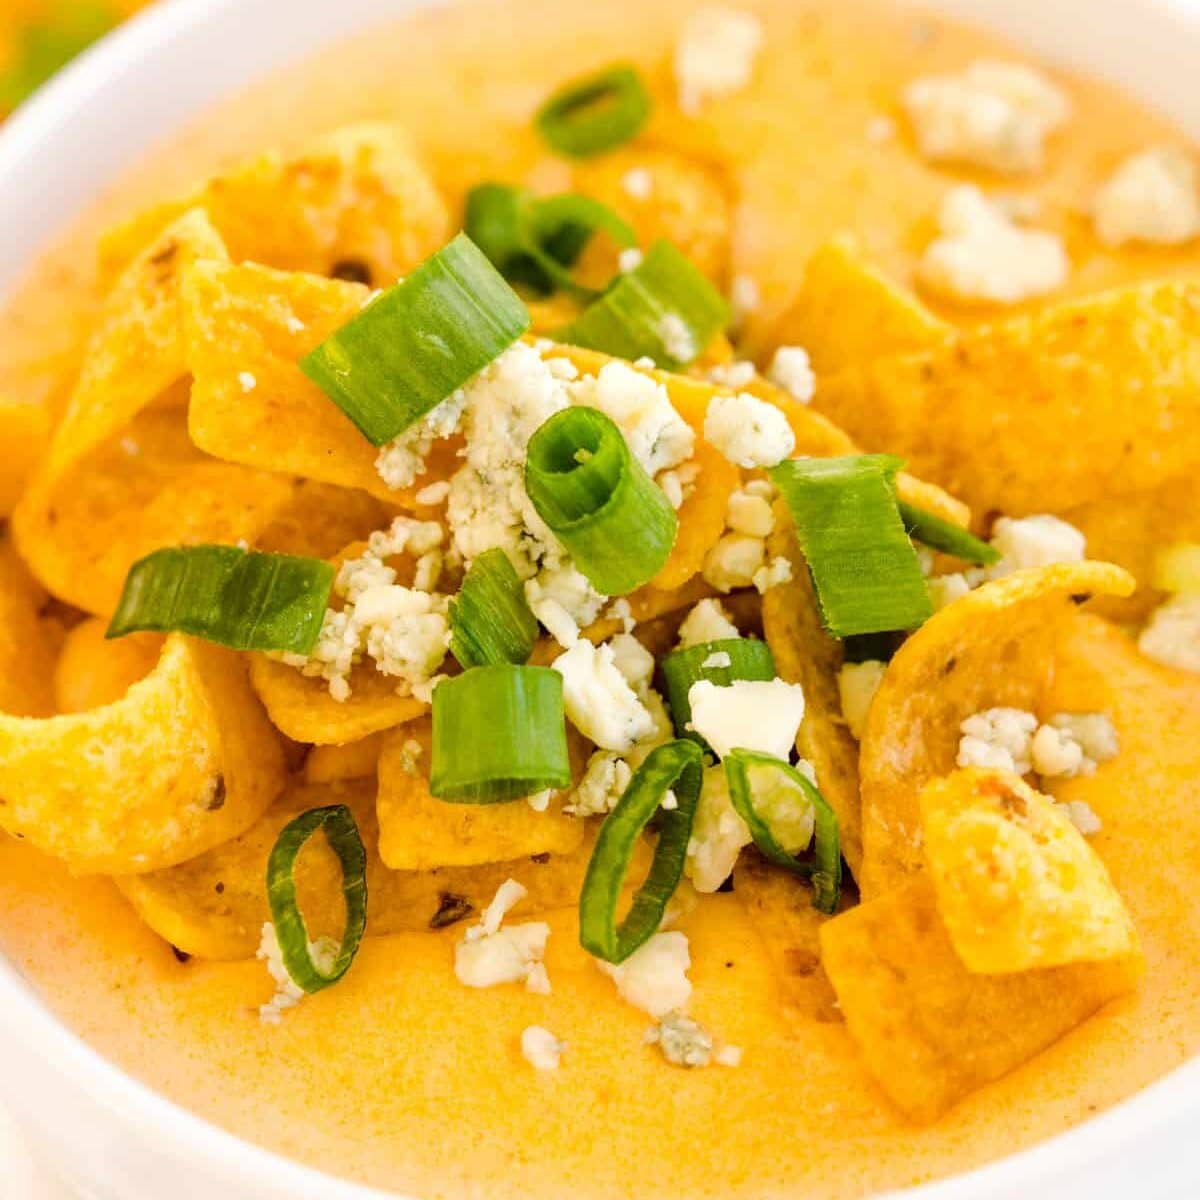 Close up image of buffalo chicken soup garnished with corn chips, green onions, and blue cheese crumbles.